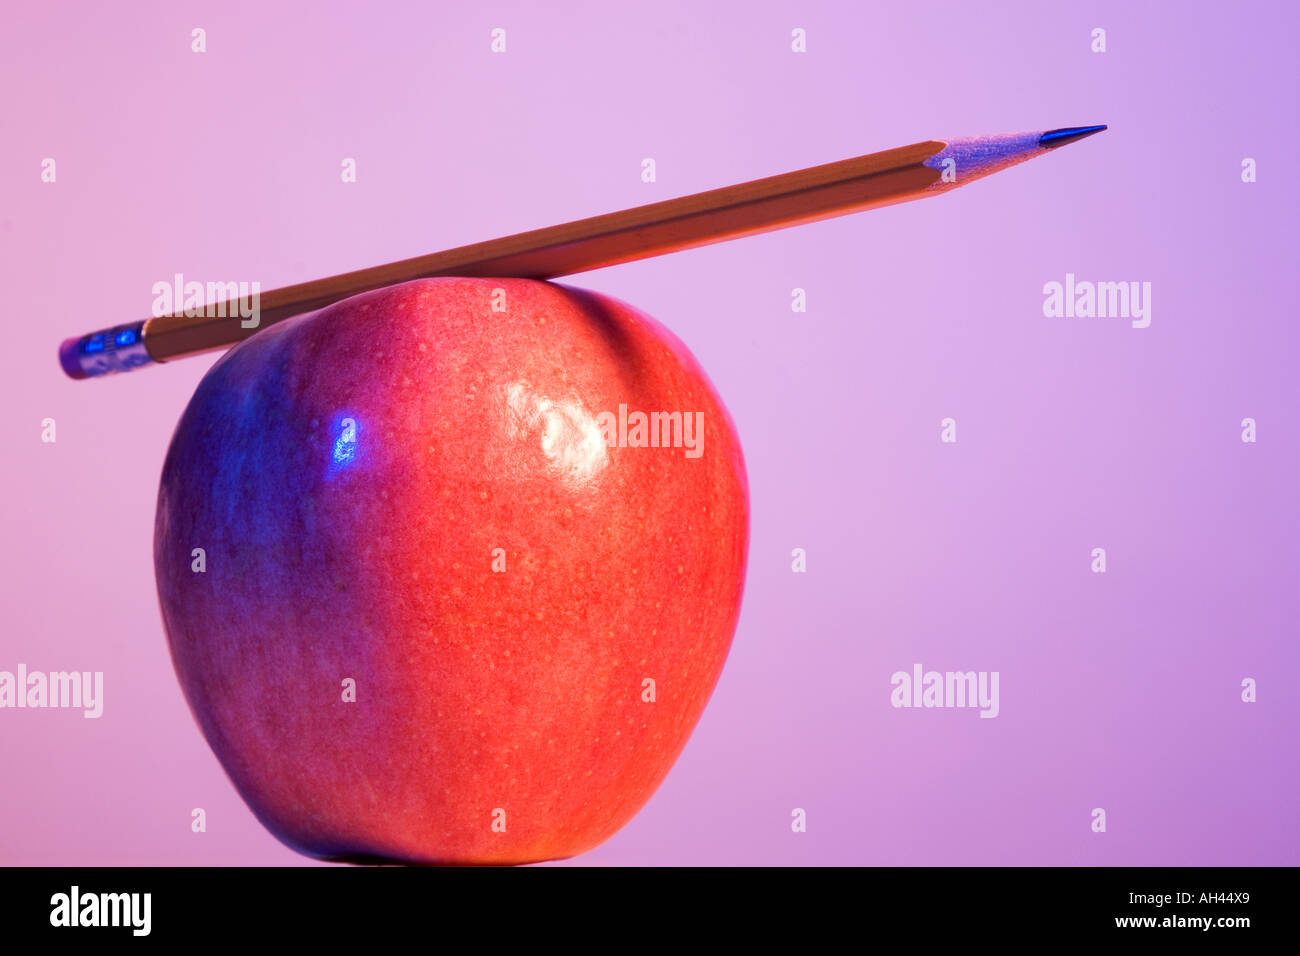 Pencil placed on an apple Stock Photo